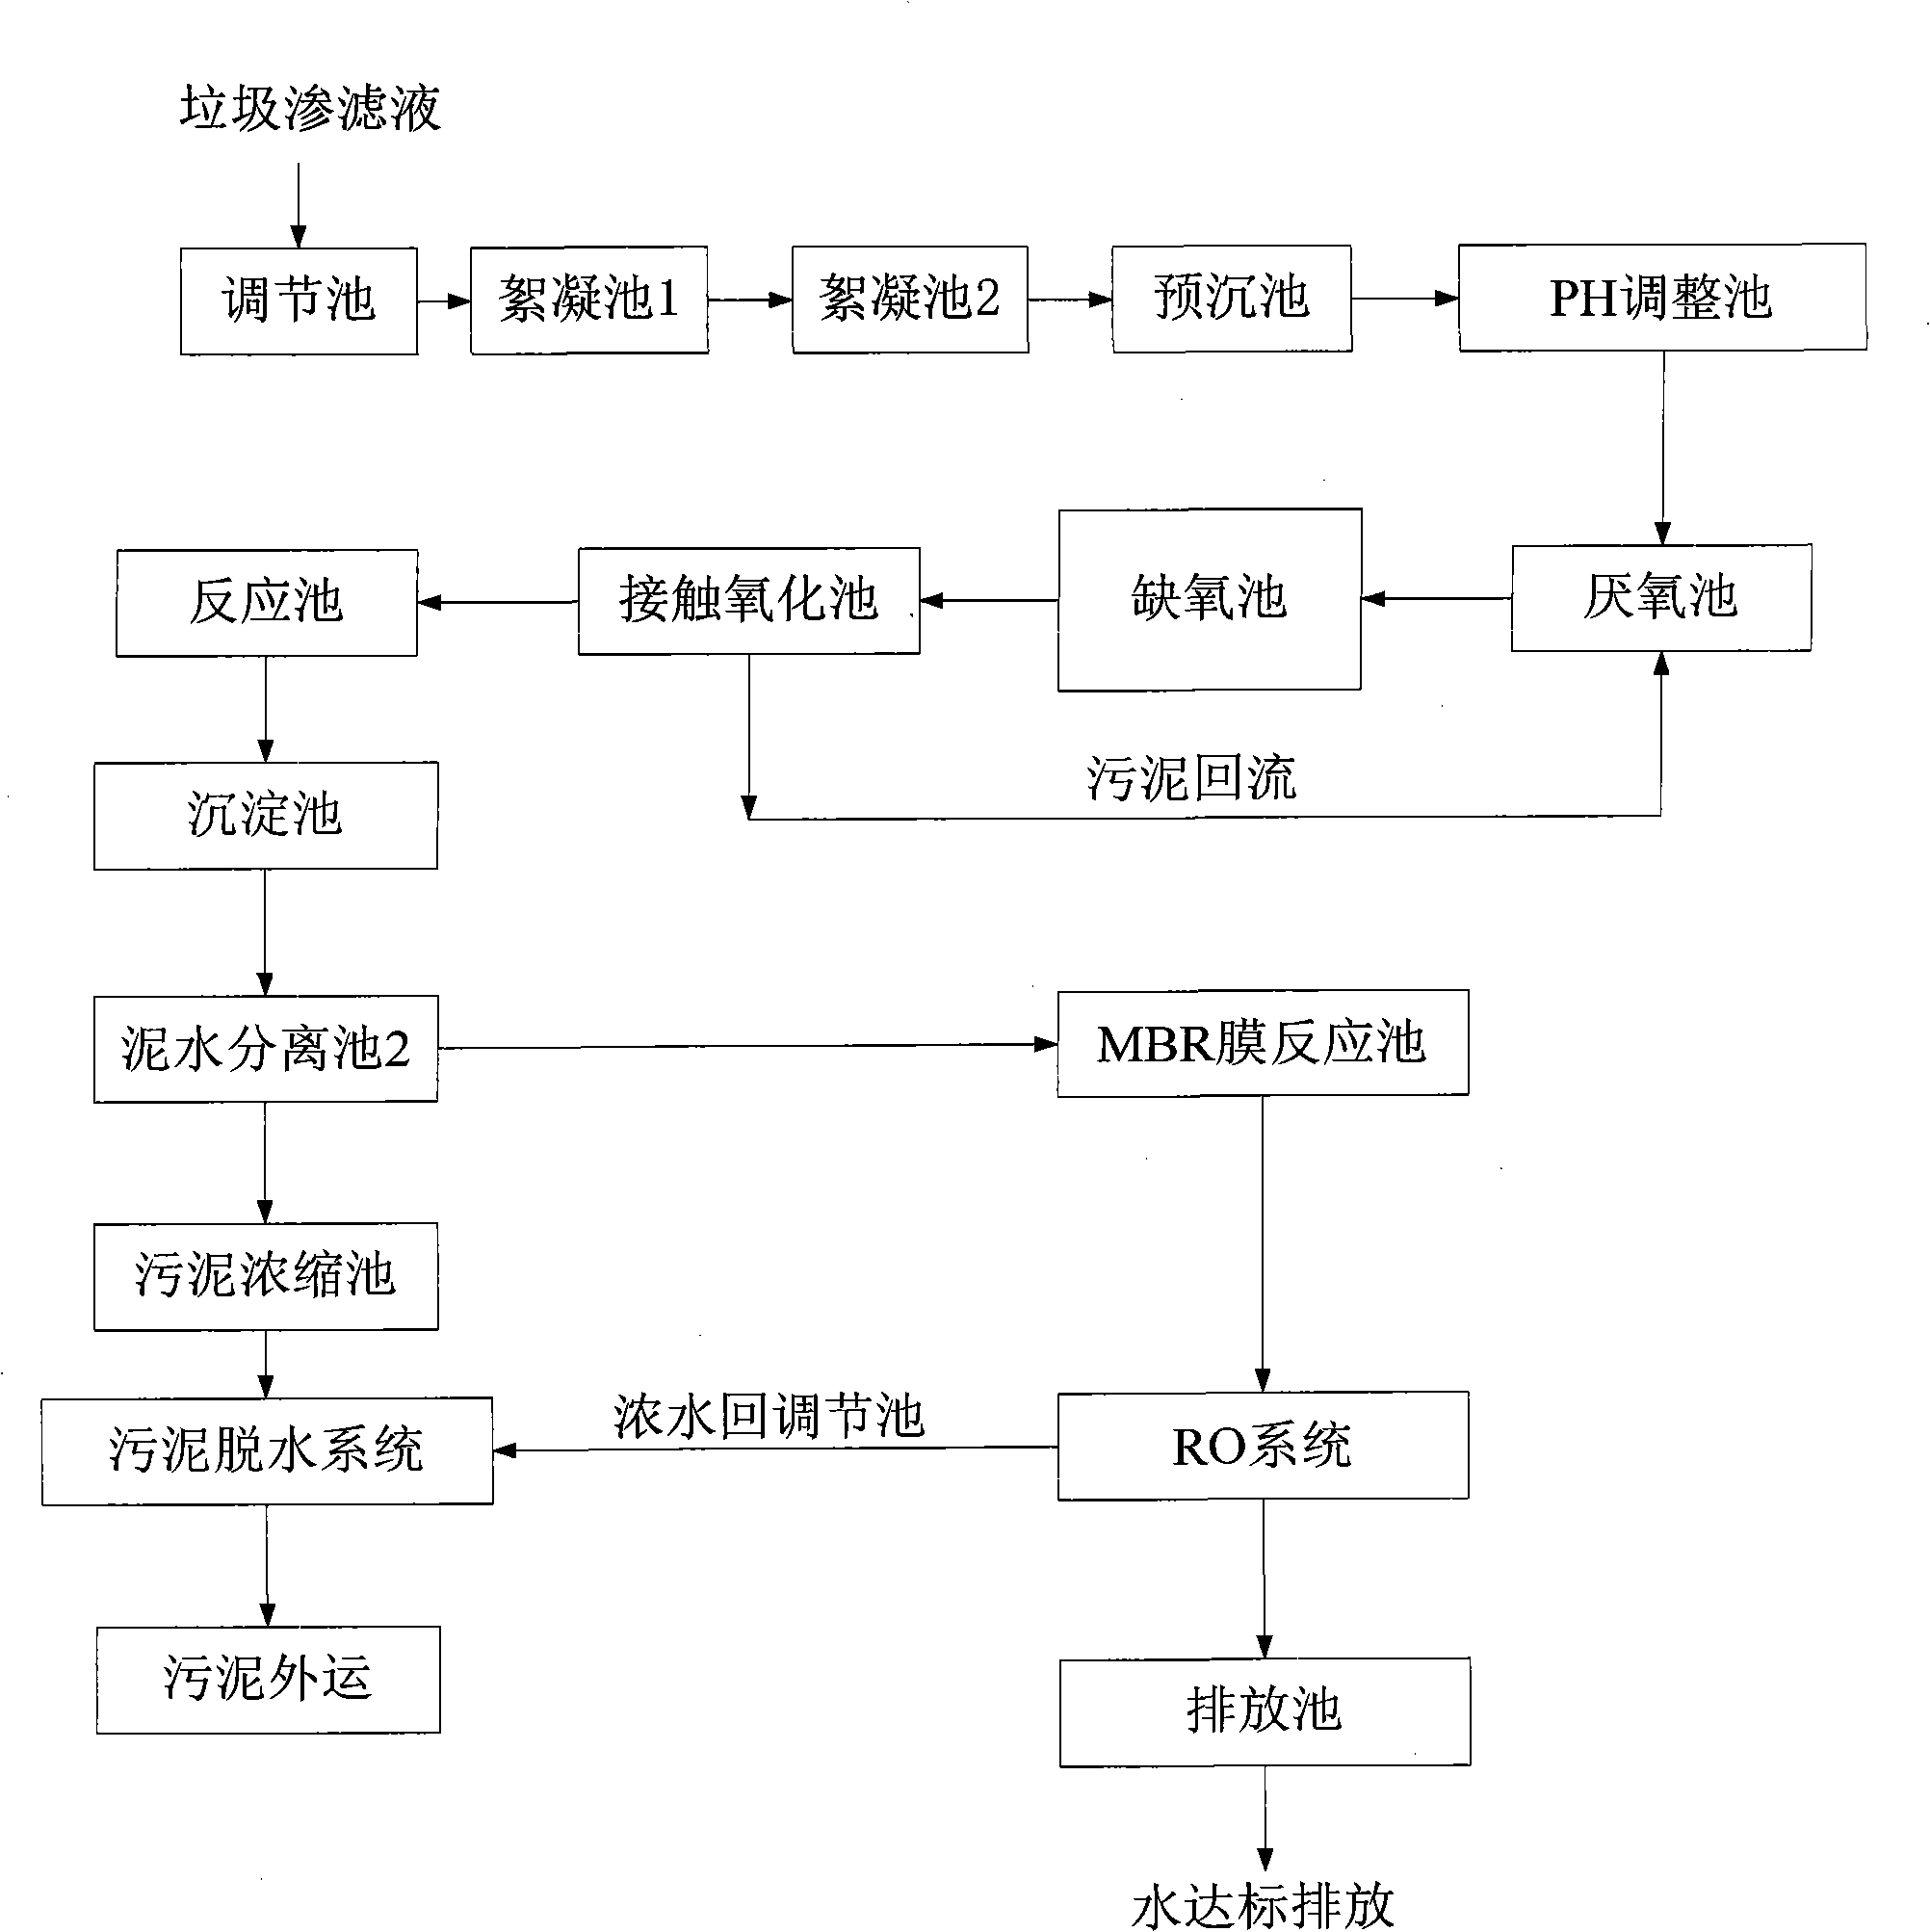 Processing method for domestic garbage leachate